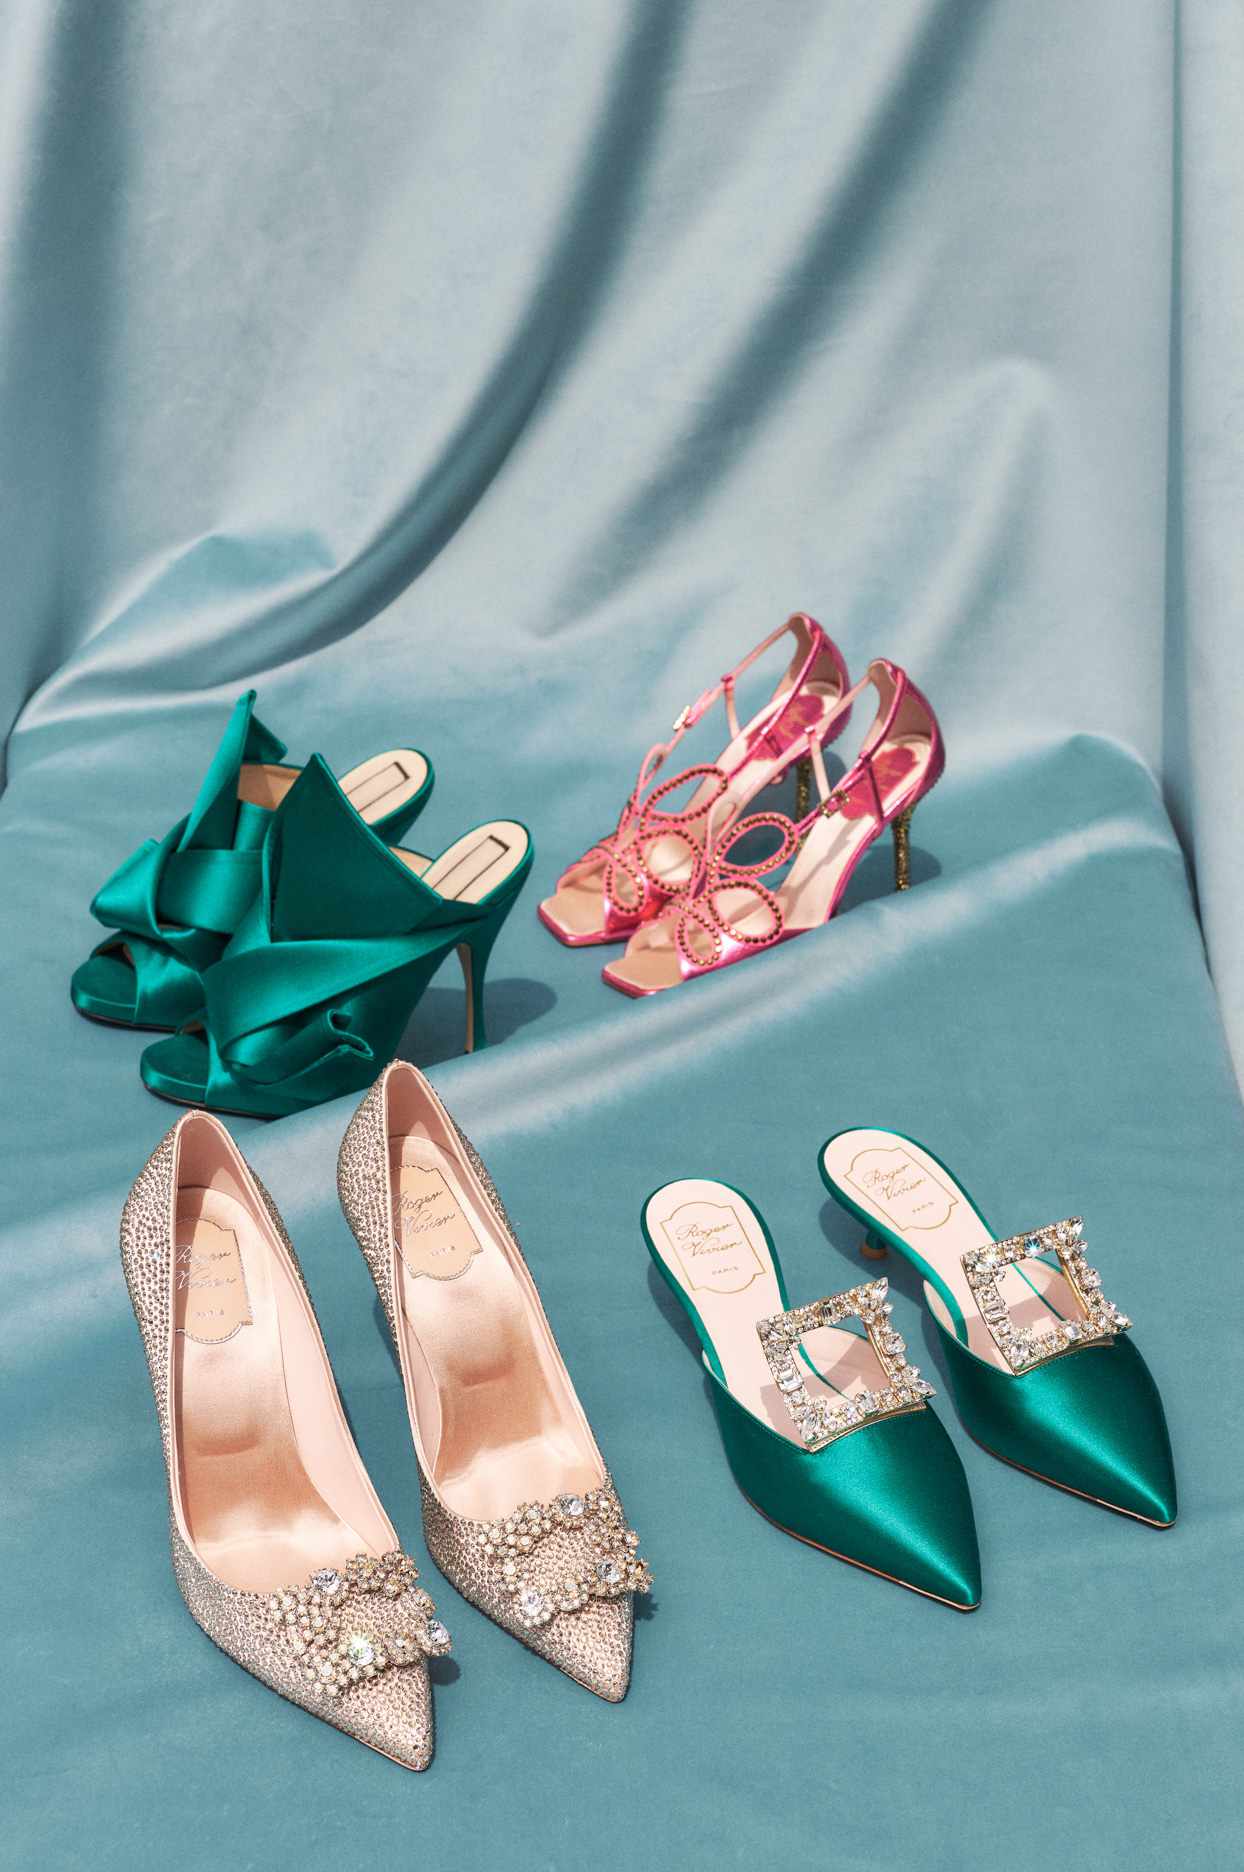 four pairs of sparkly pumps against a blue backdrop